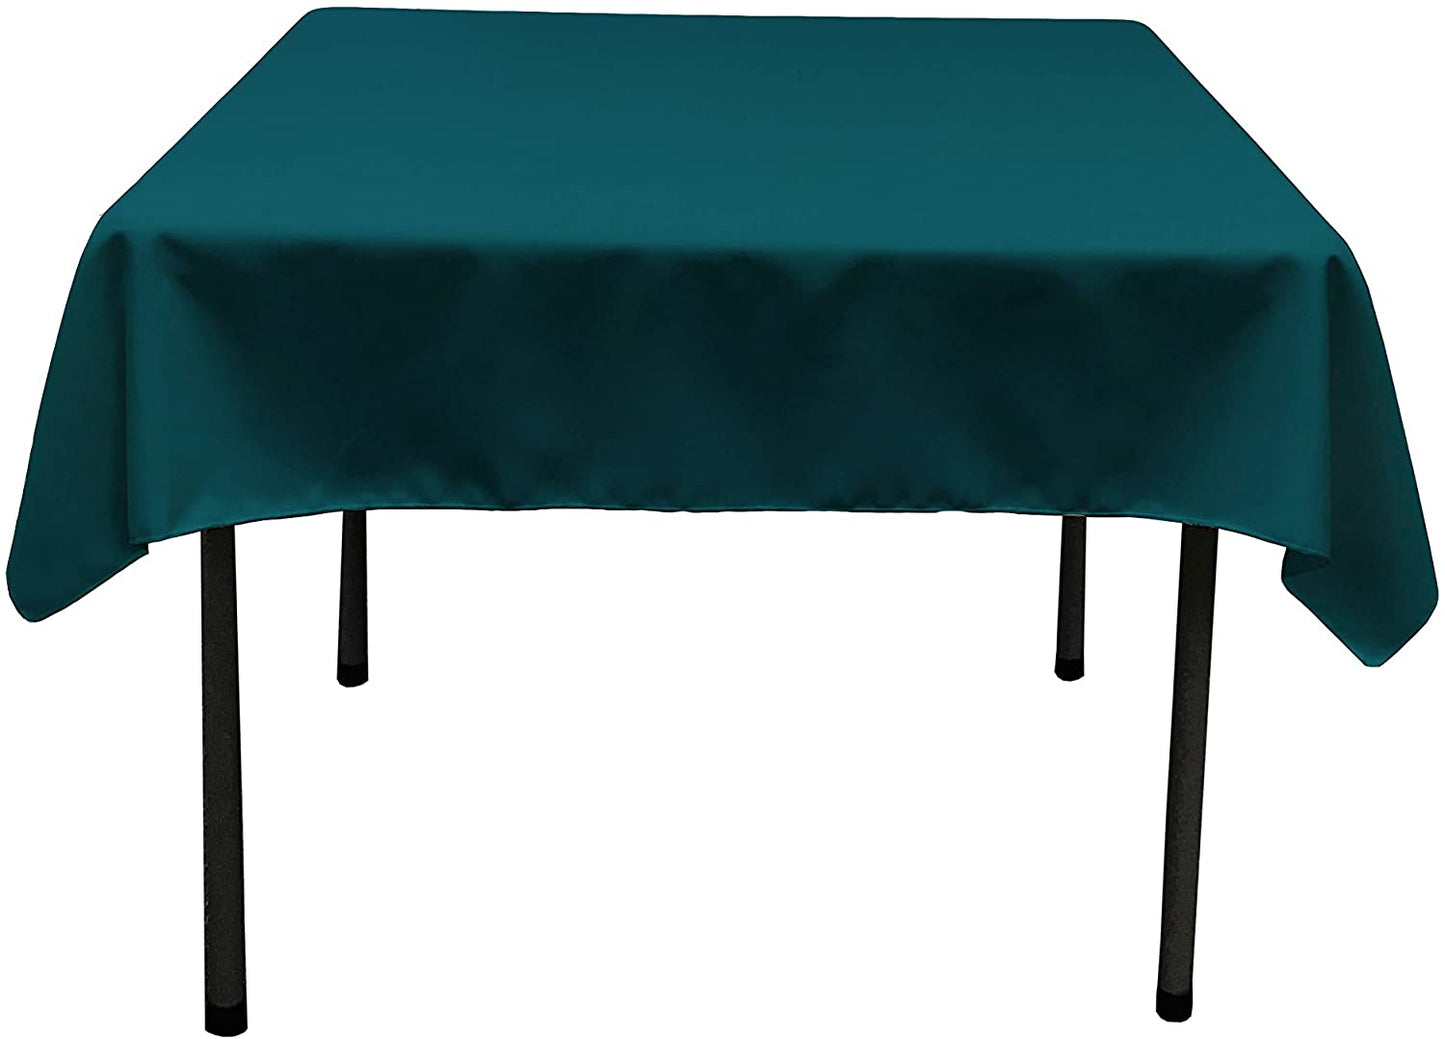 Polyester Poplin Washable Square Tablecloth, Stain and Wrinkle Resistant Table Cover Teal